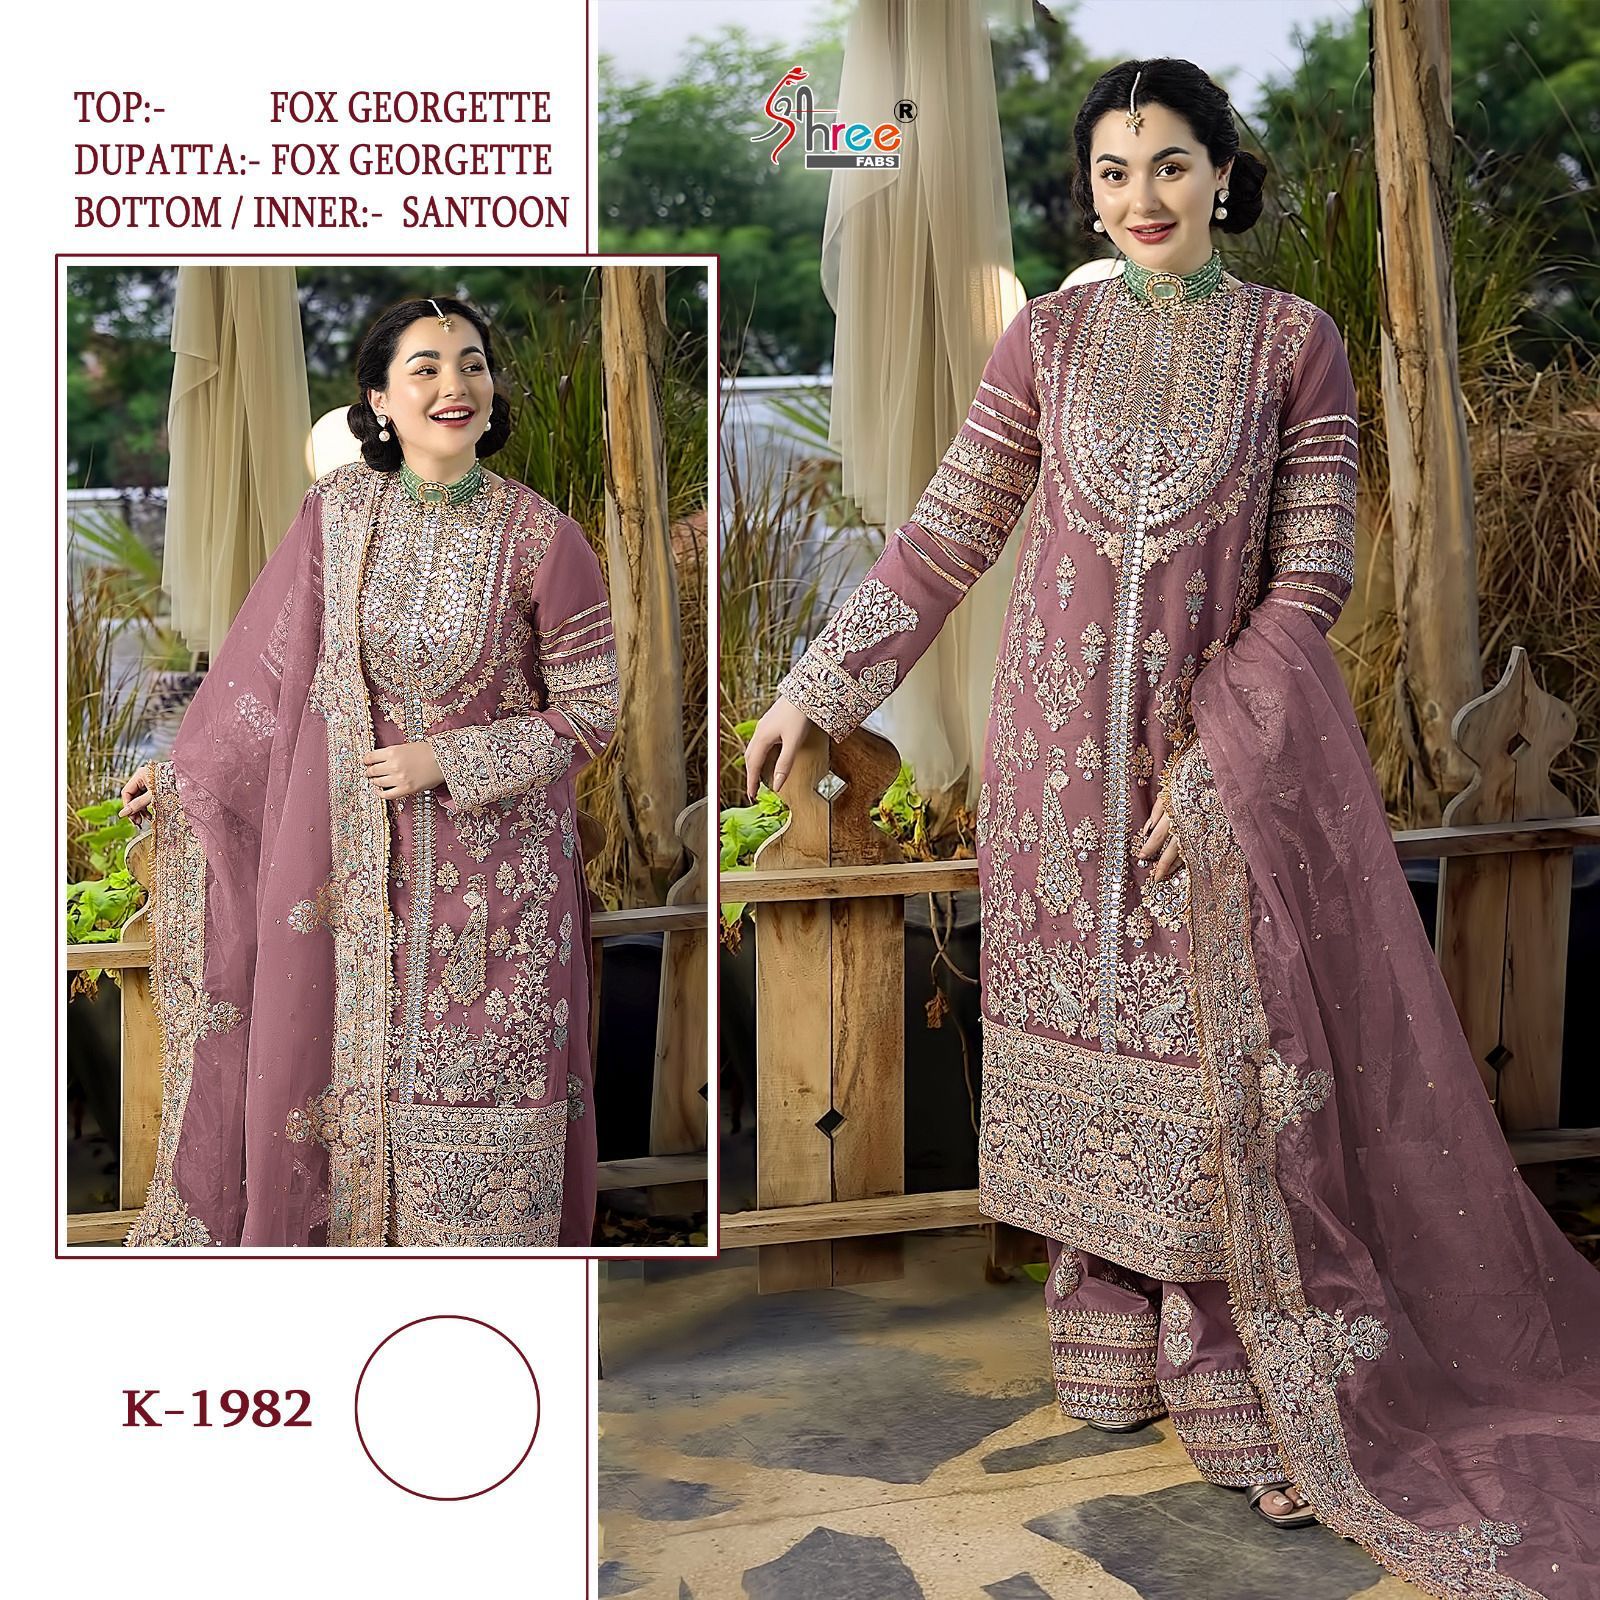 SHREE FABS K 1982 PAKISTANI SUITS IN INDIA